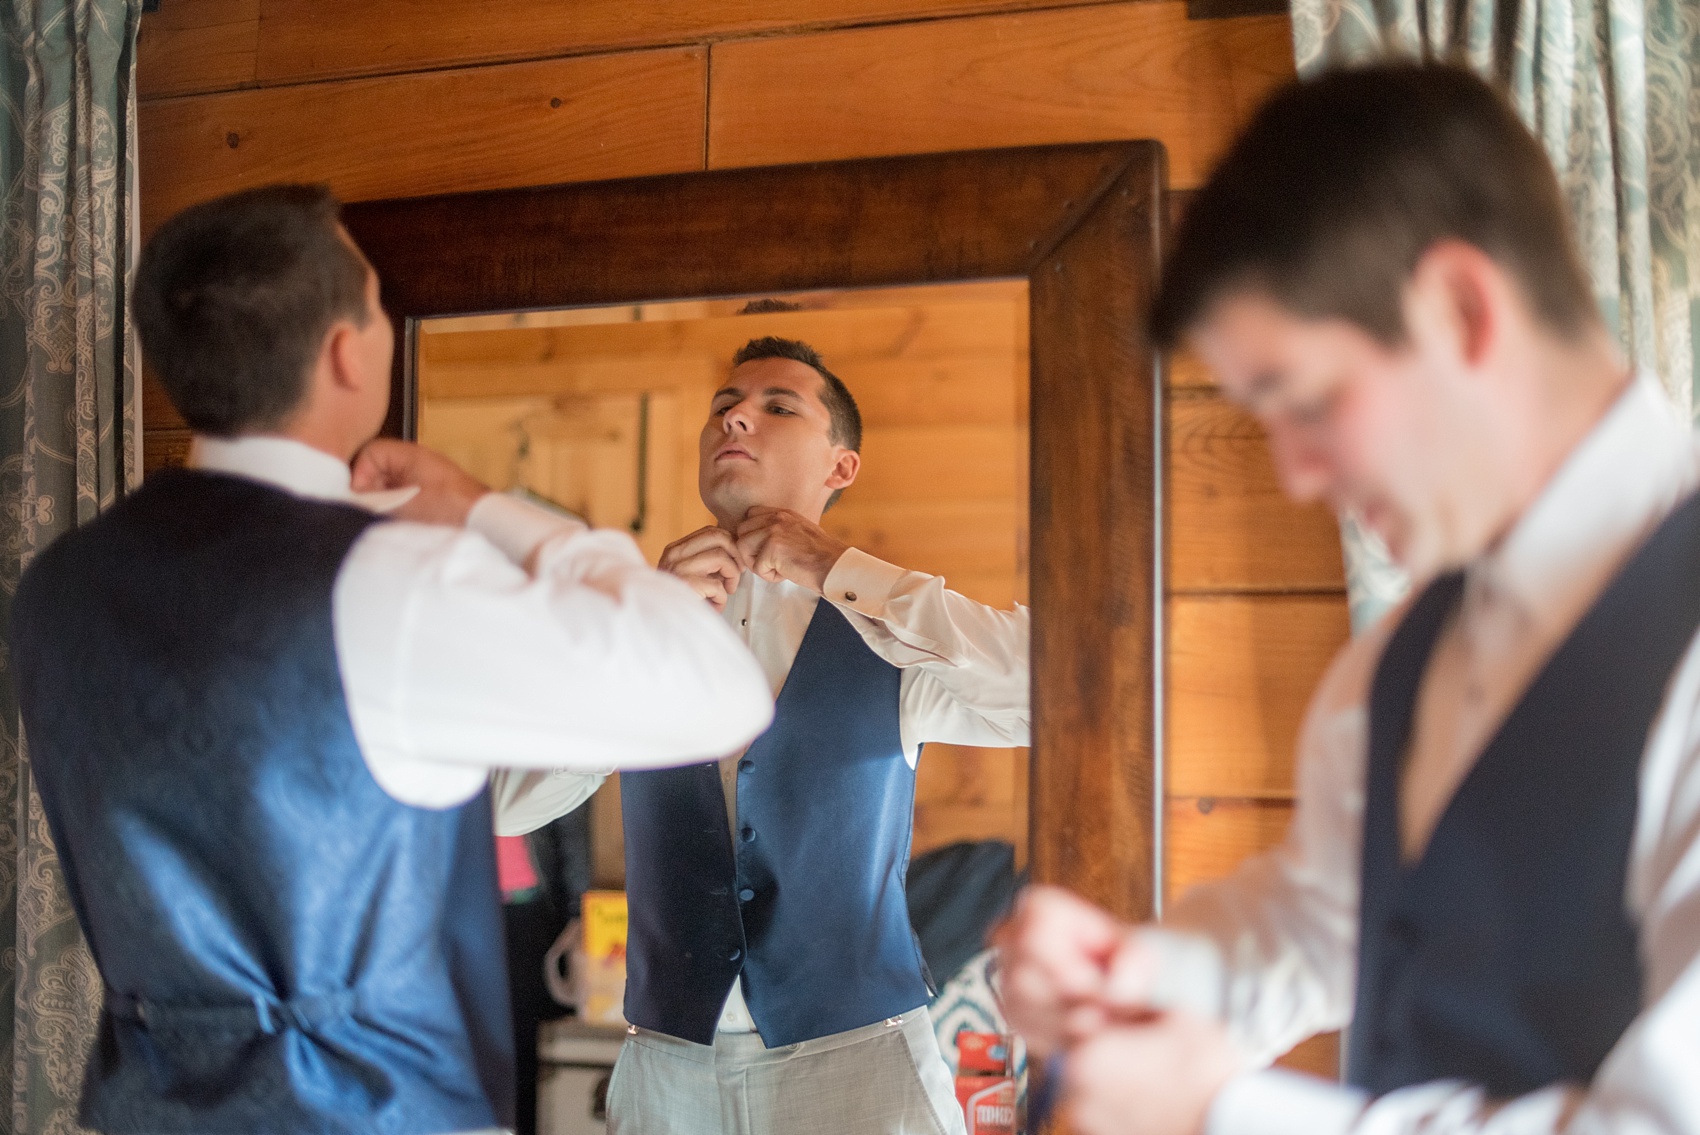 Mikkel Paige Photography photos of a wedding at The Barn at Valahalla in Chapel Hill, NC. The groomsmen prepared with beer and bow ties in their rustic room.